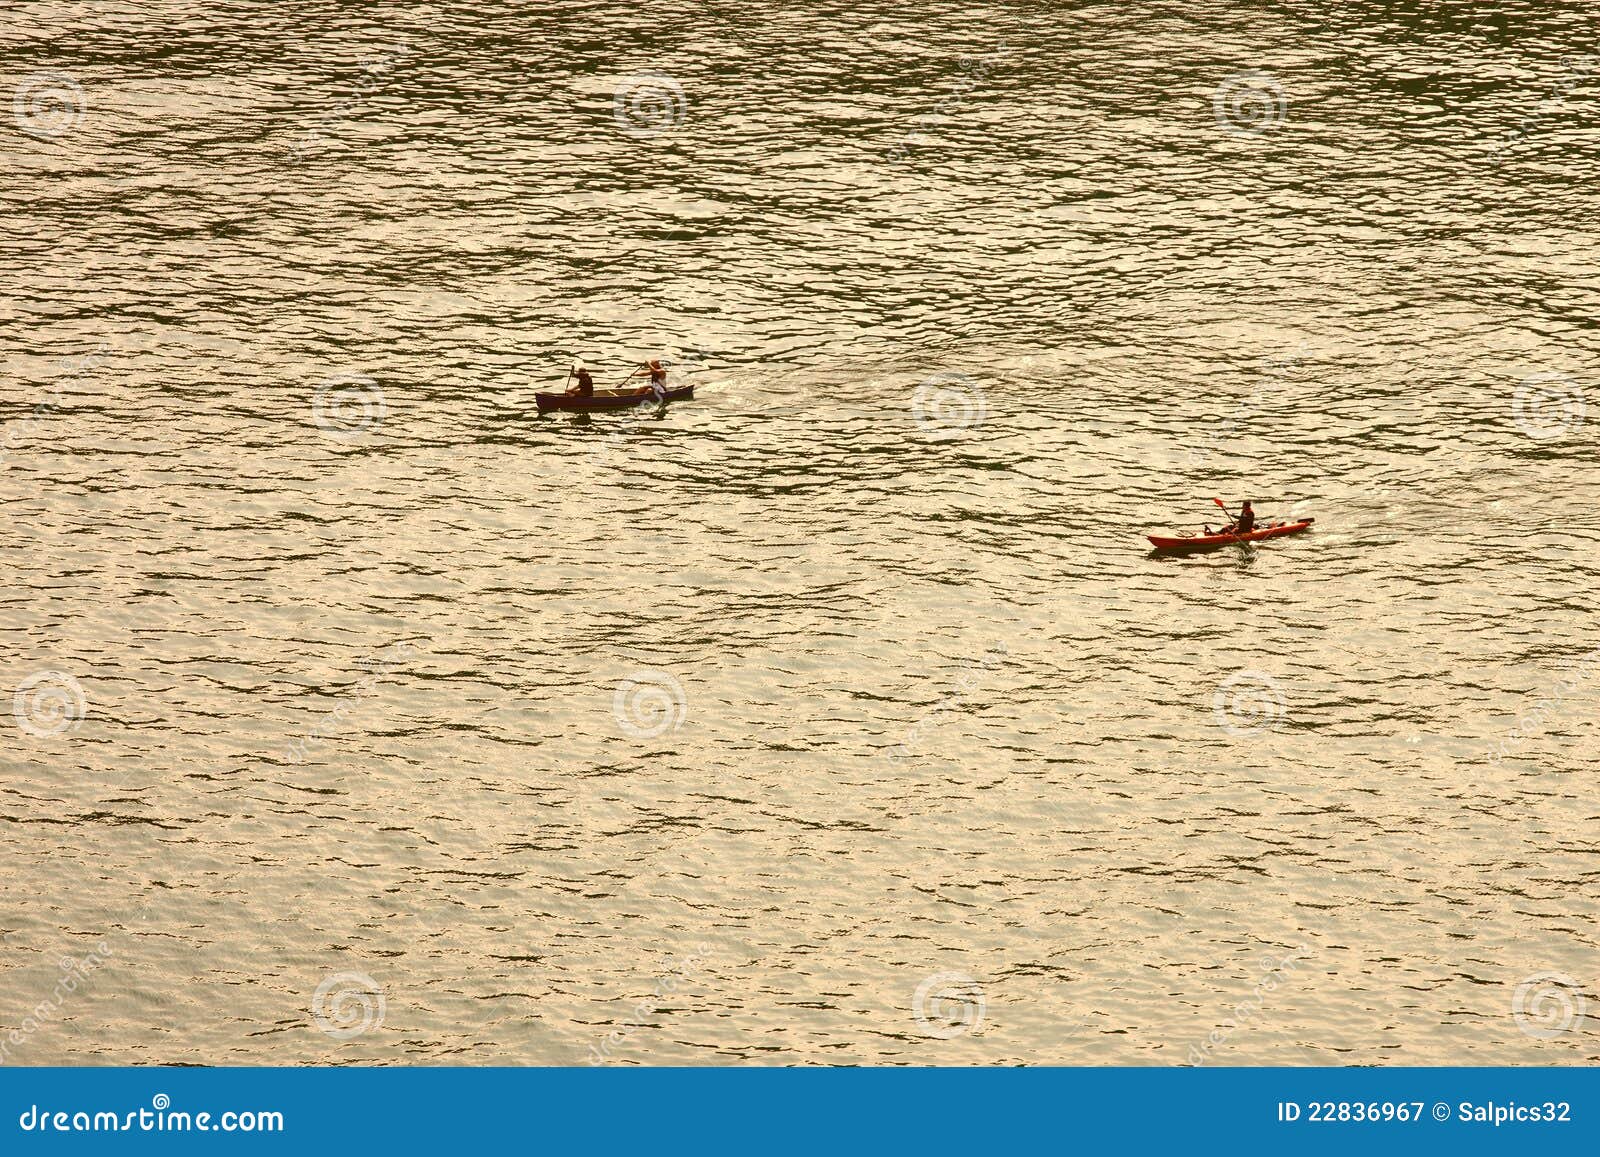 Royalty Free Stock Photography: Anonymous people rowing a boat